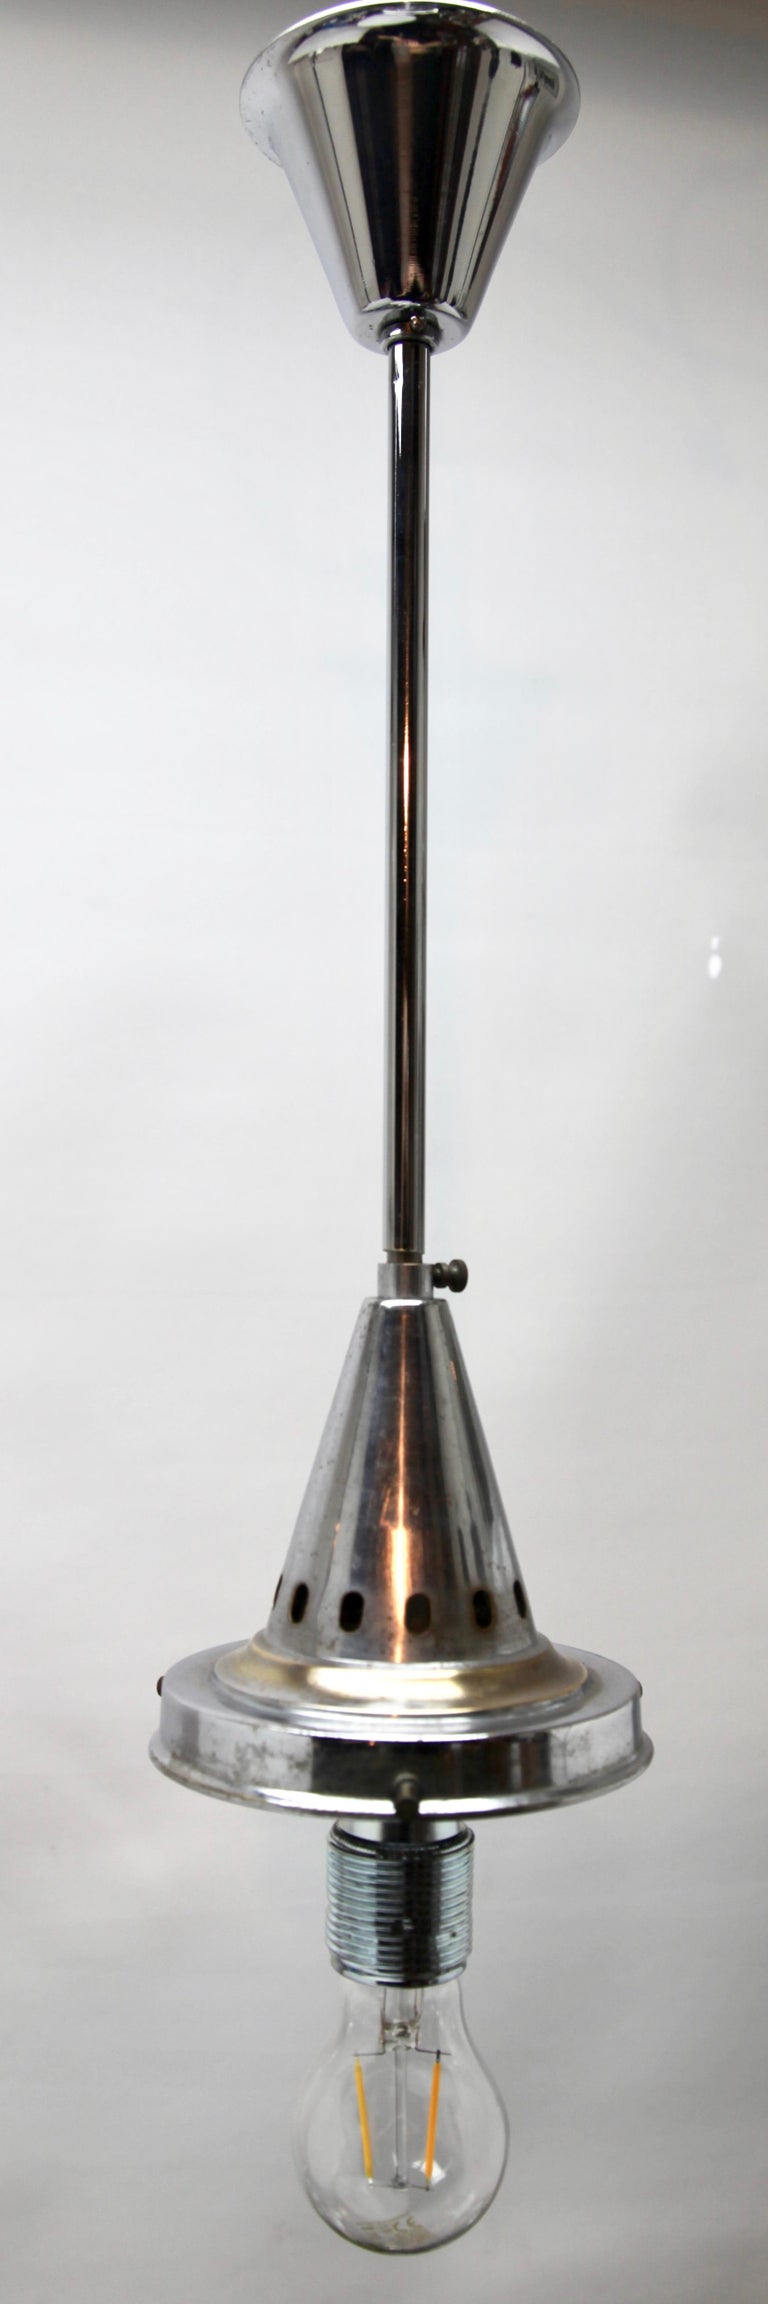 Belgian Phillips Pendant Stem Lamp with Large Stepped Opaline Shade, 1930s, Belgium For Sale